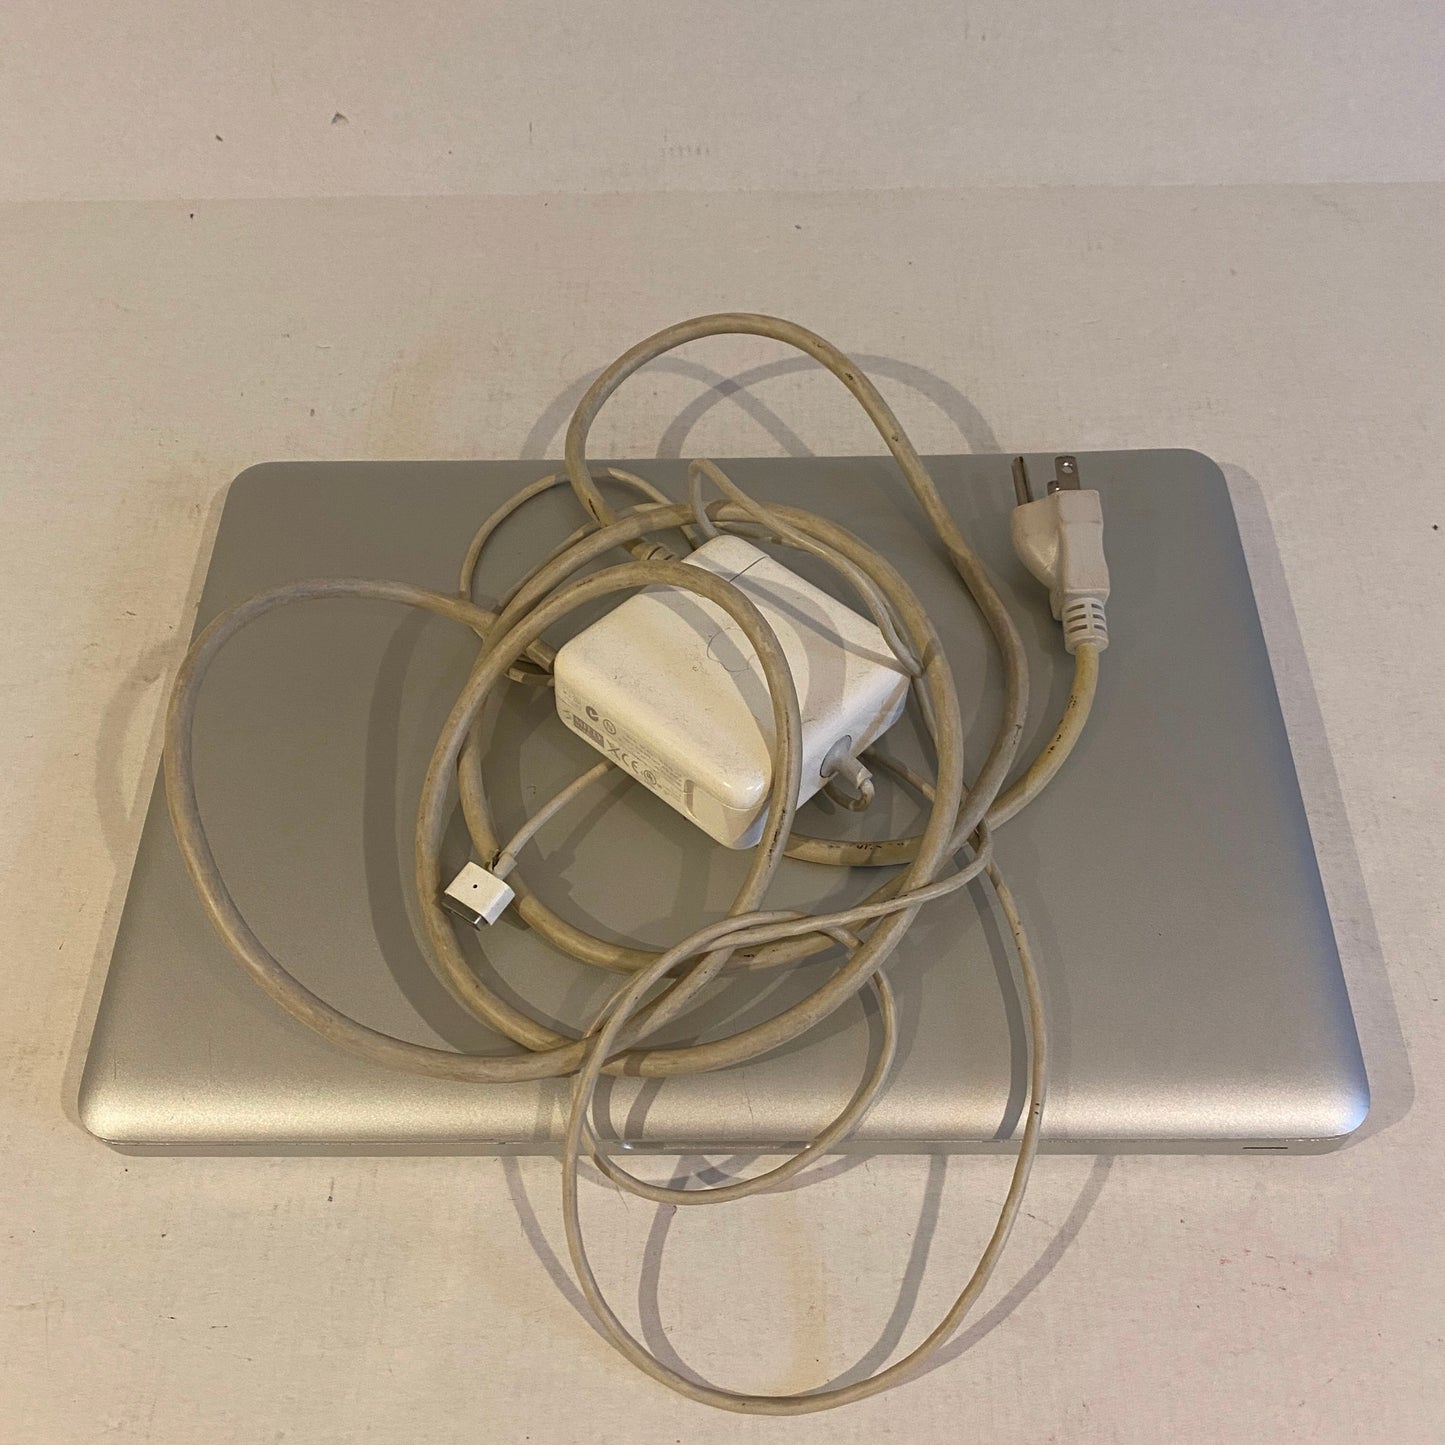 For Parts - 2008 Macbook No HDD - A1278